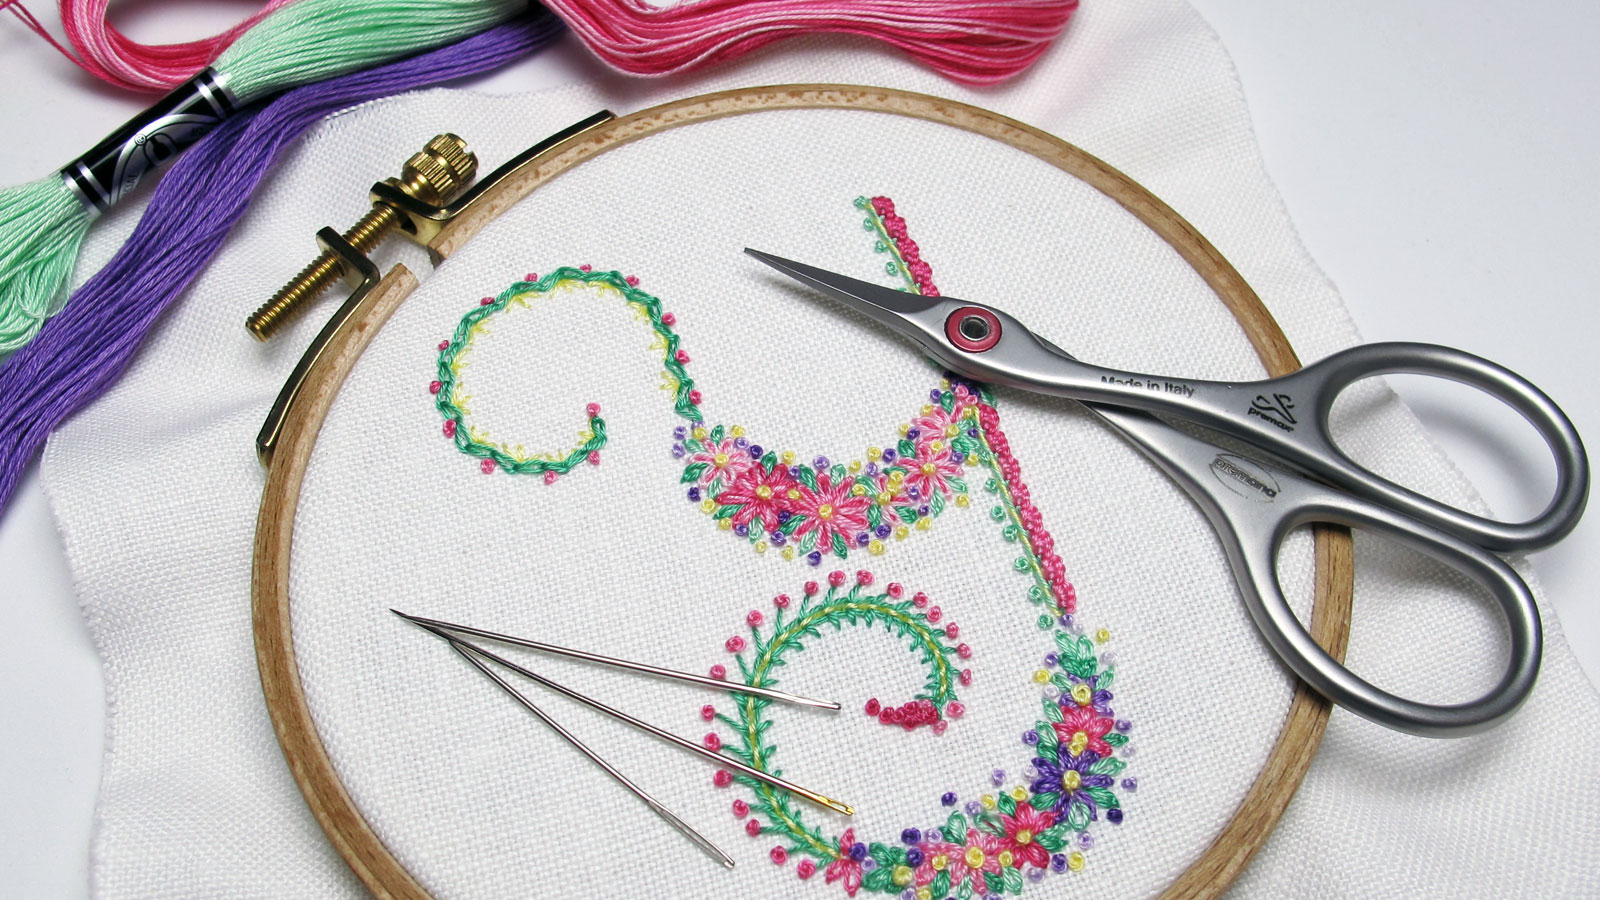 How To Read Embroidery Patterns Needlenthread Tips Tricks And Great Resources For Hand Embroidery